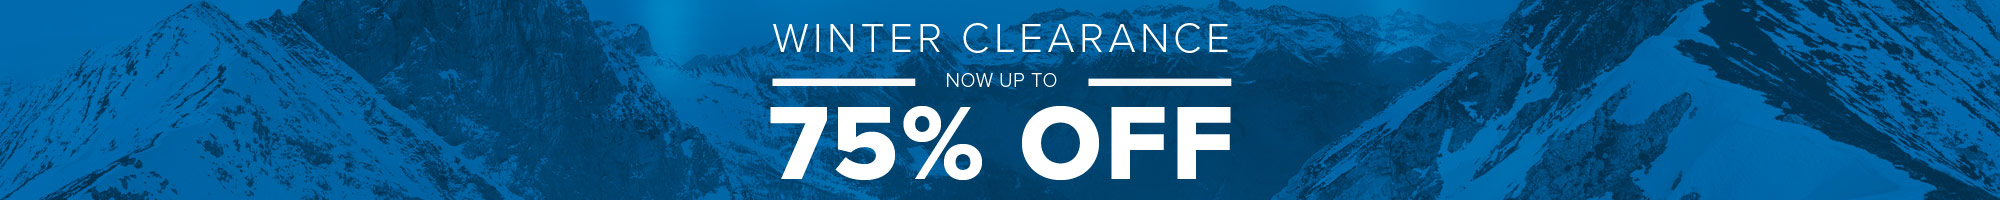 Winter Clearance Sale - Up To 75% Off